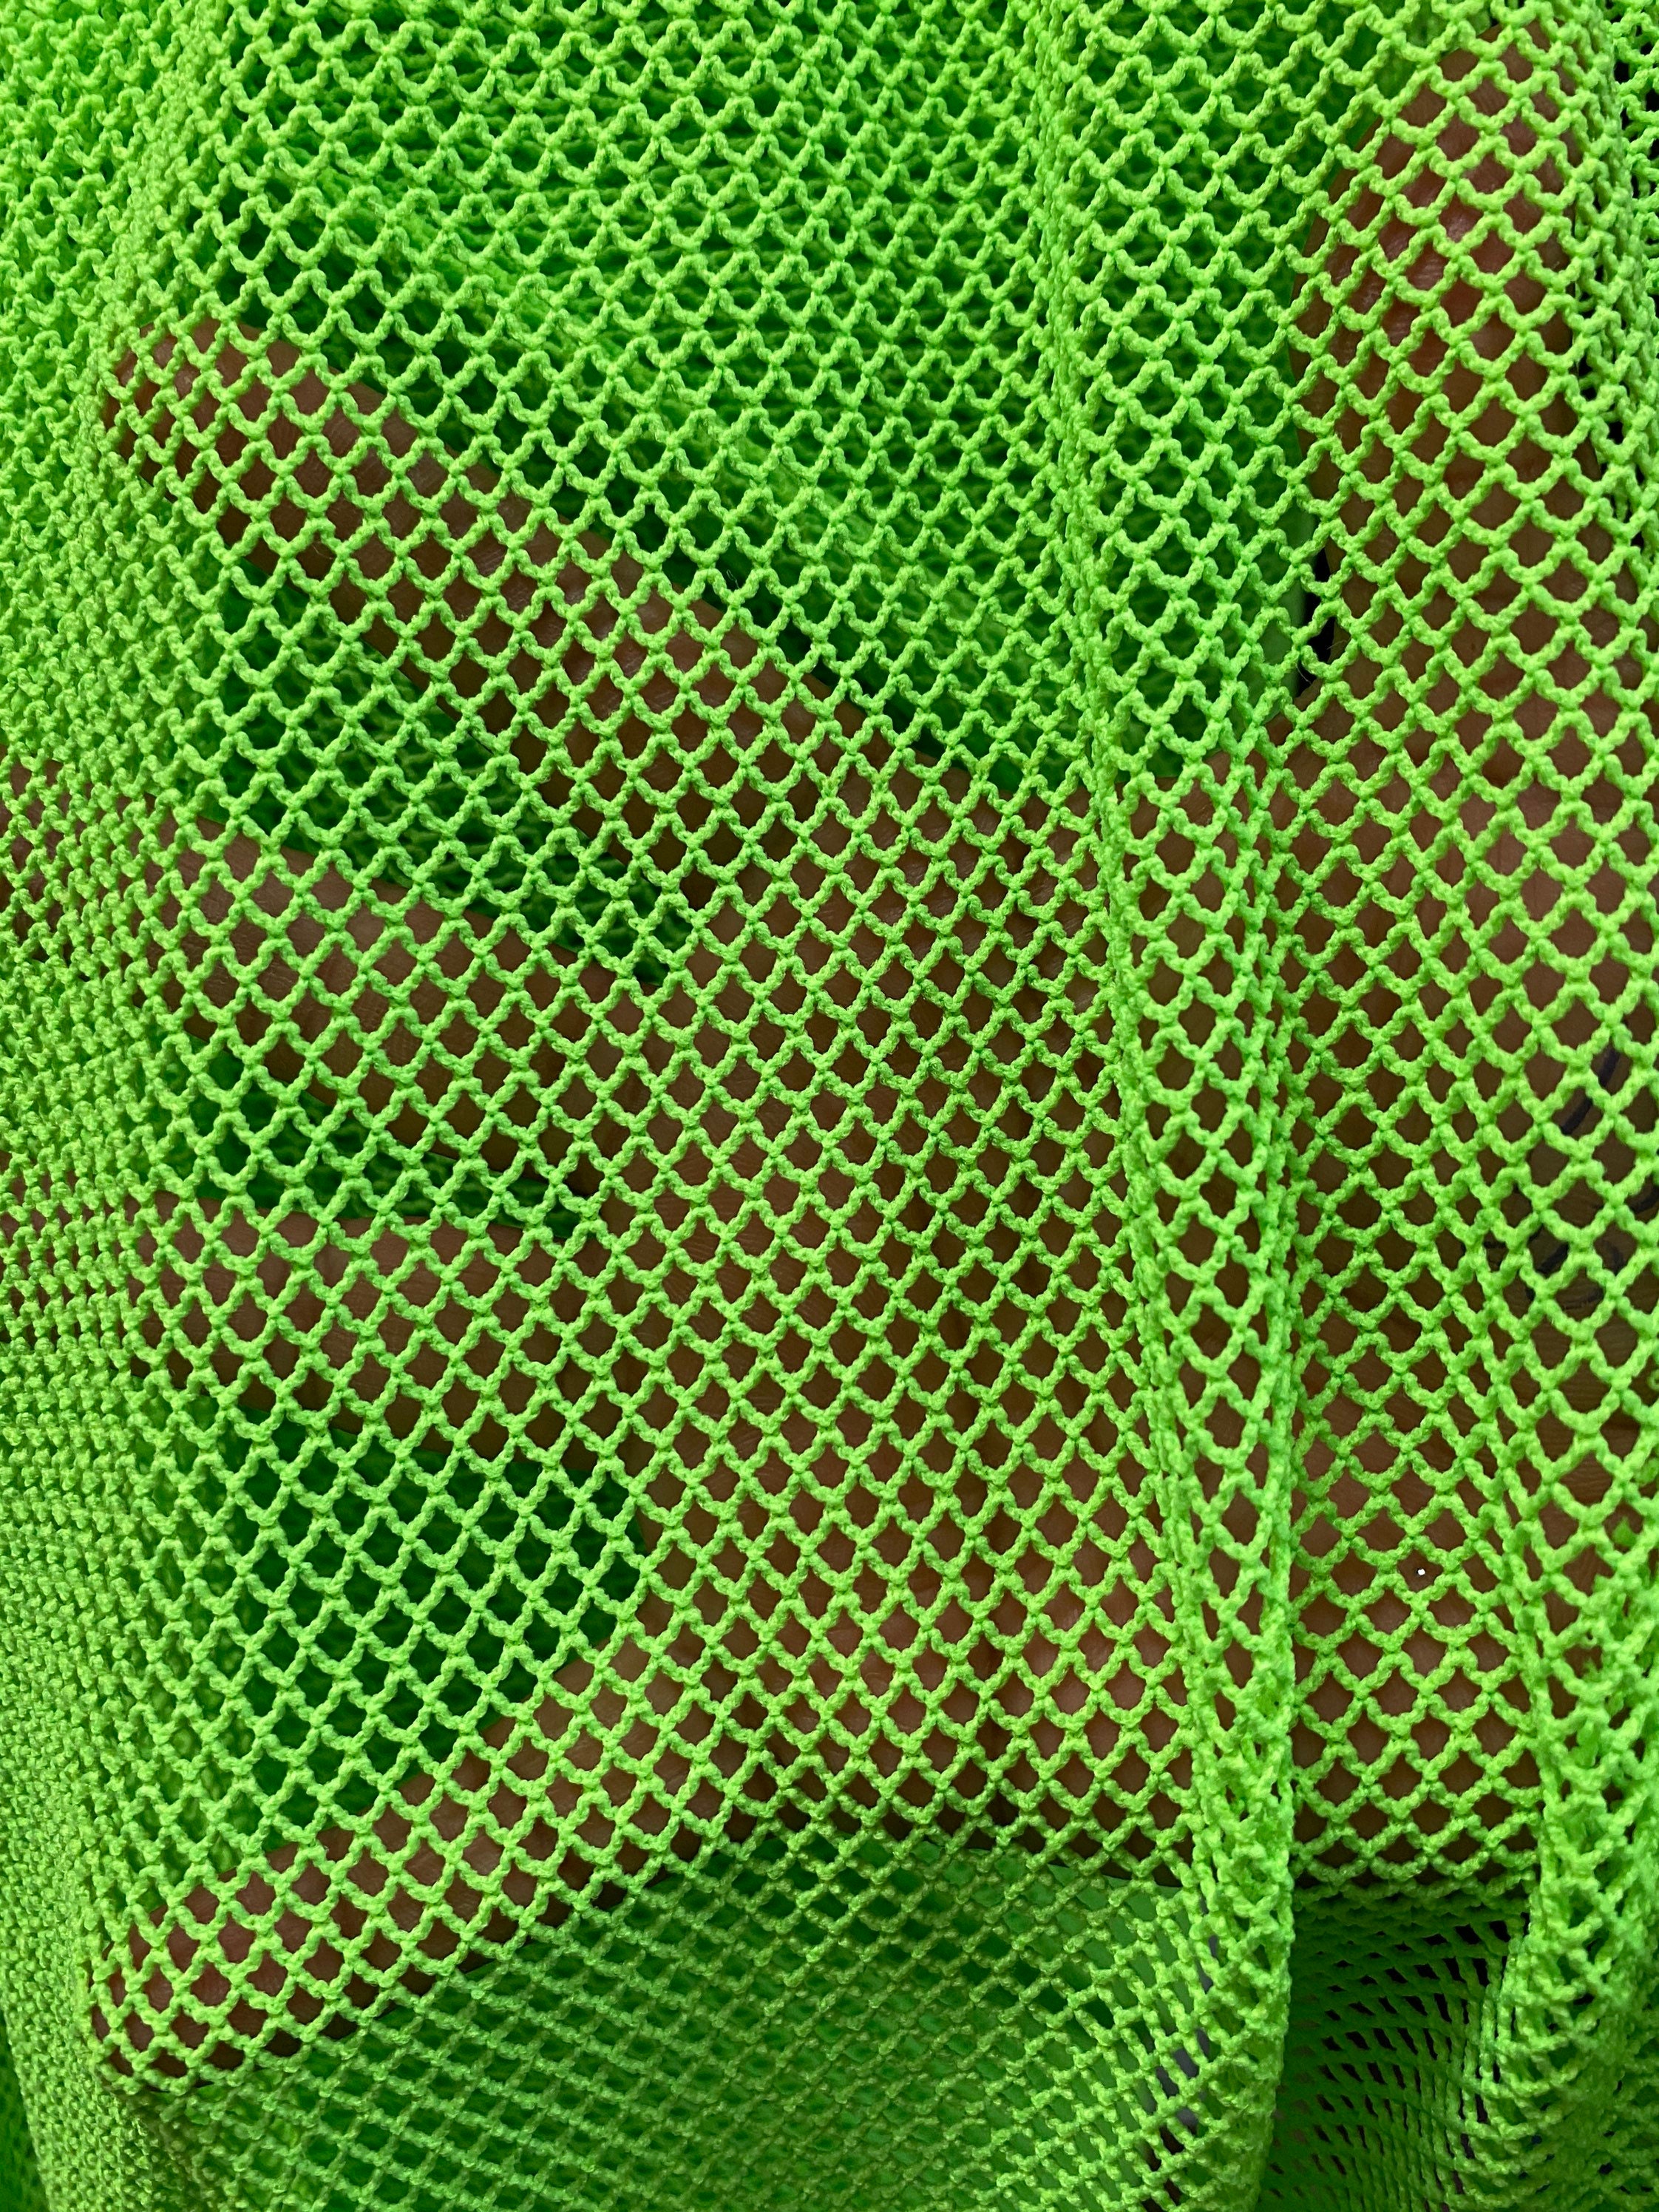 Vibrant Neon Green Mini Fishnet Stretch fabric sold by the | Etsy